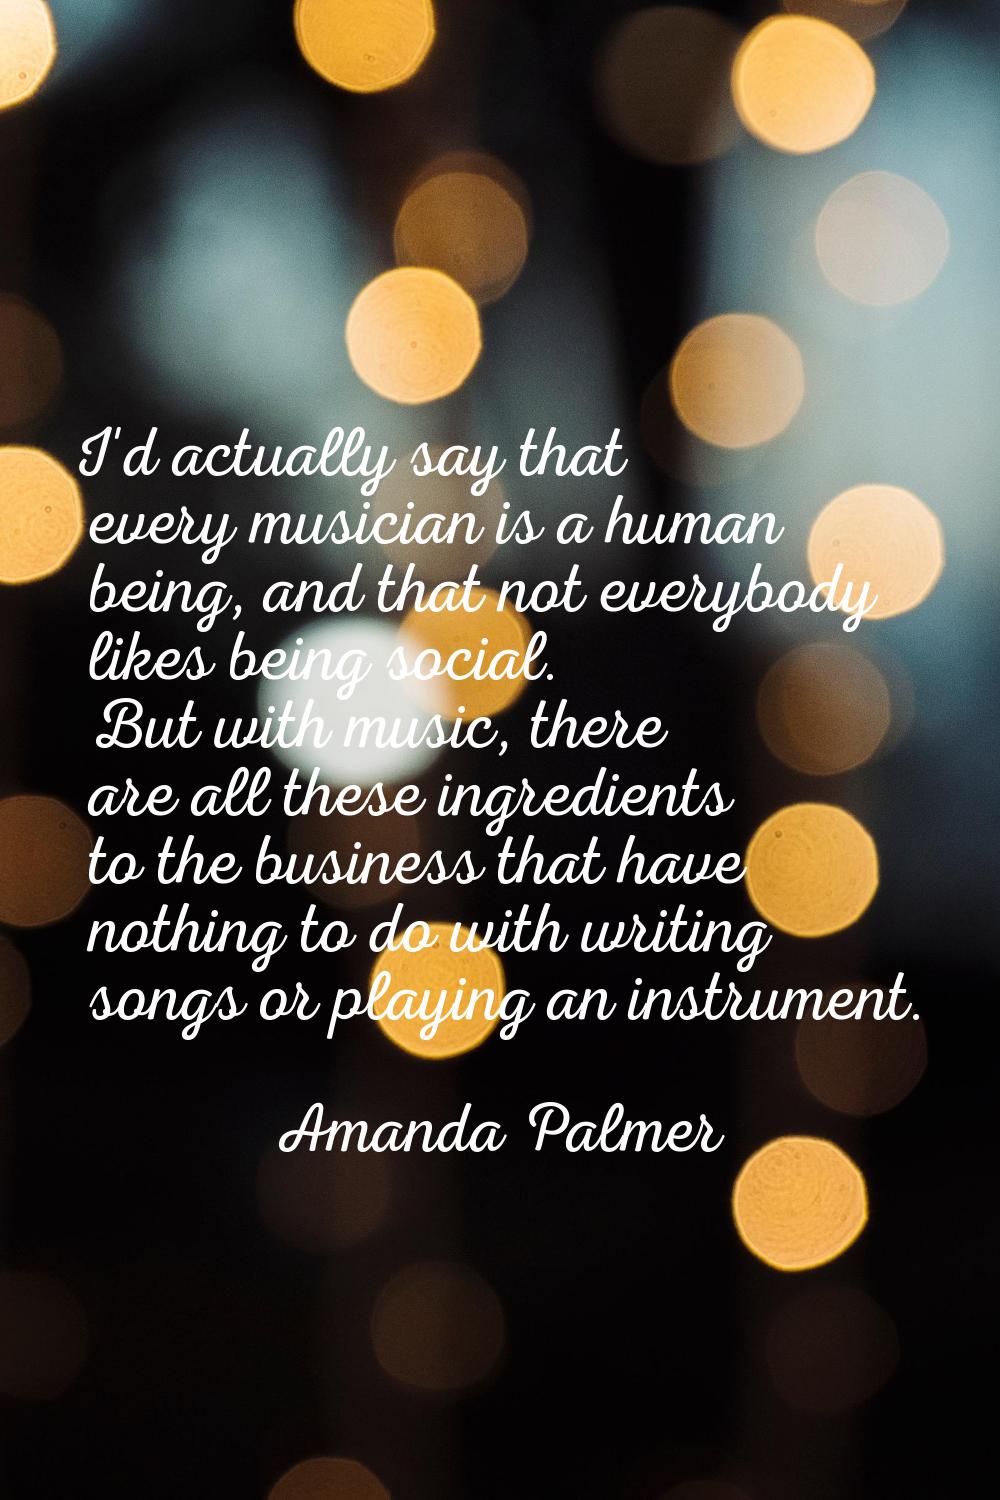 I'd actually say that every musician is a human being, and that not everybody likes being social. B